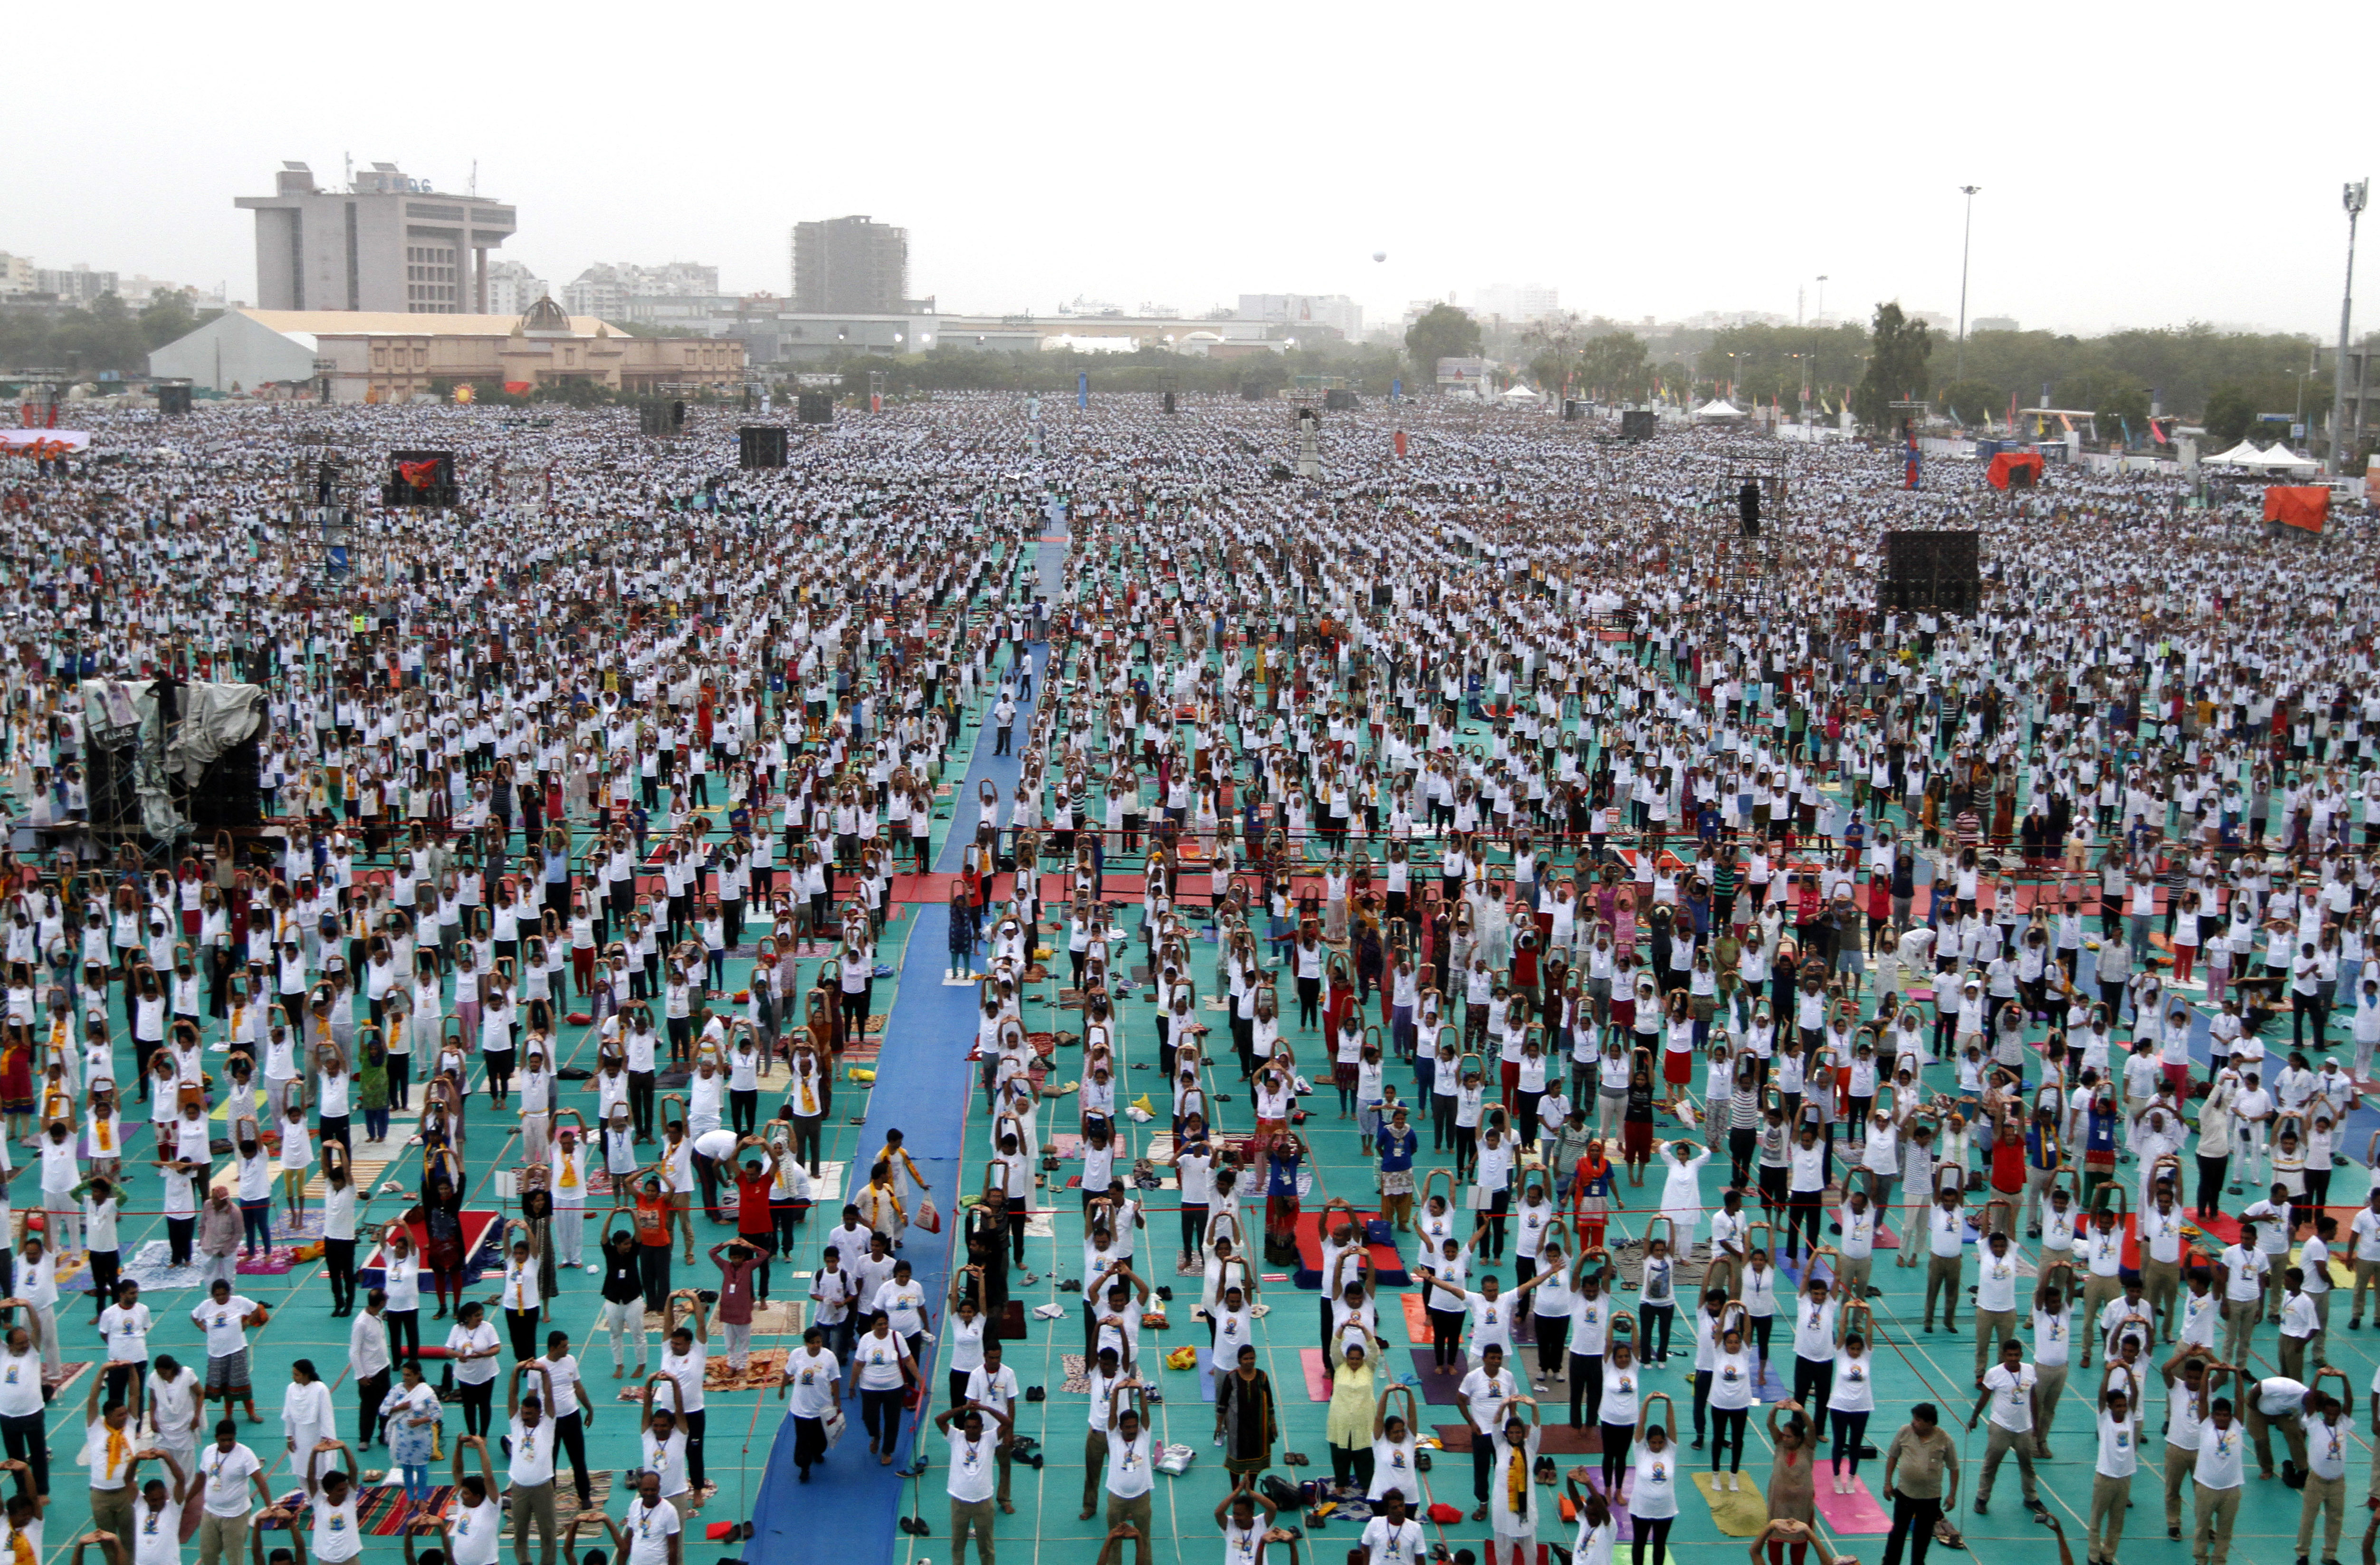 Indians perform Yoga during International Yoga Day celebrations in Ahmadabad, India, Wednesday, June 21, 2017. Millions of yoga enthusiasts across India take part in a mass yoga sessions to mark the third International Yoga Day which falls on June 21 every year. (AP Photo/Ajit Solanki)